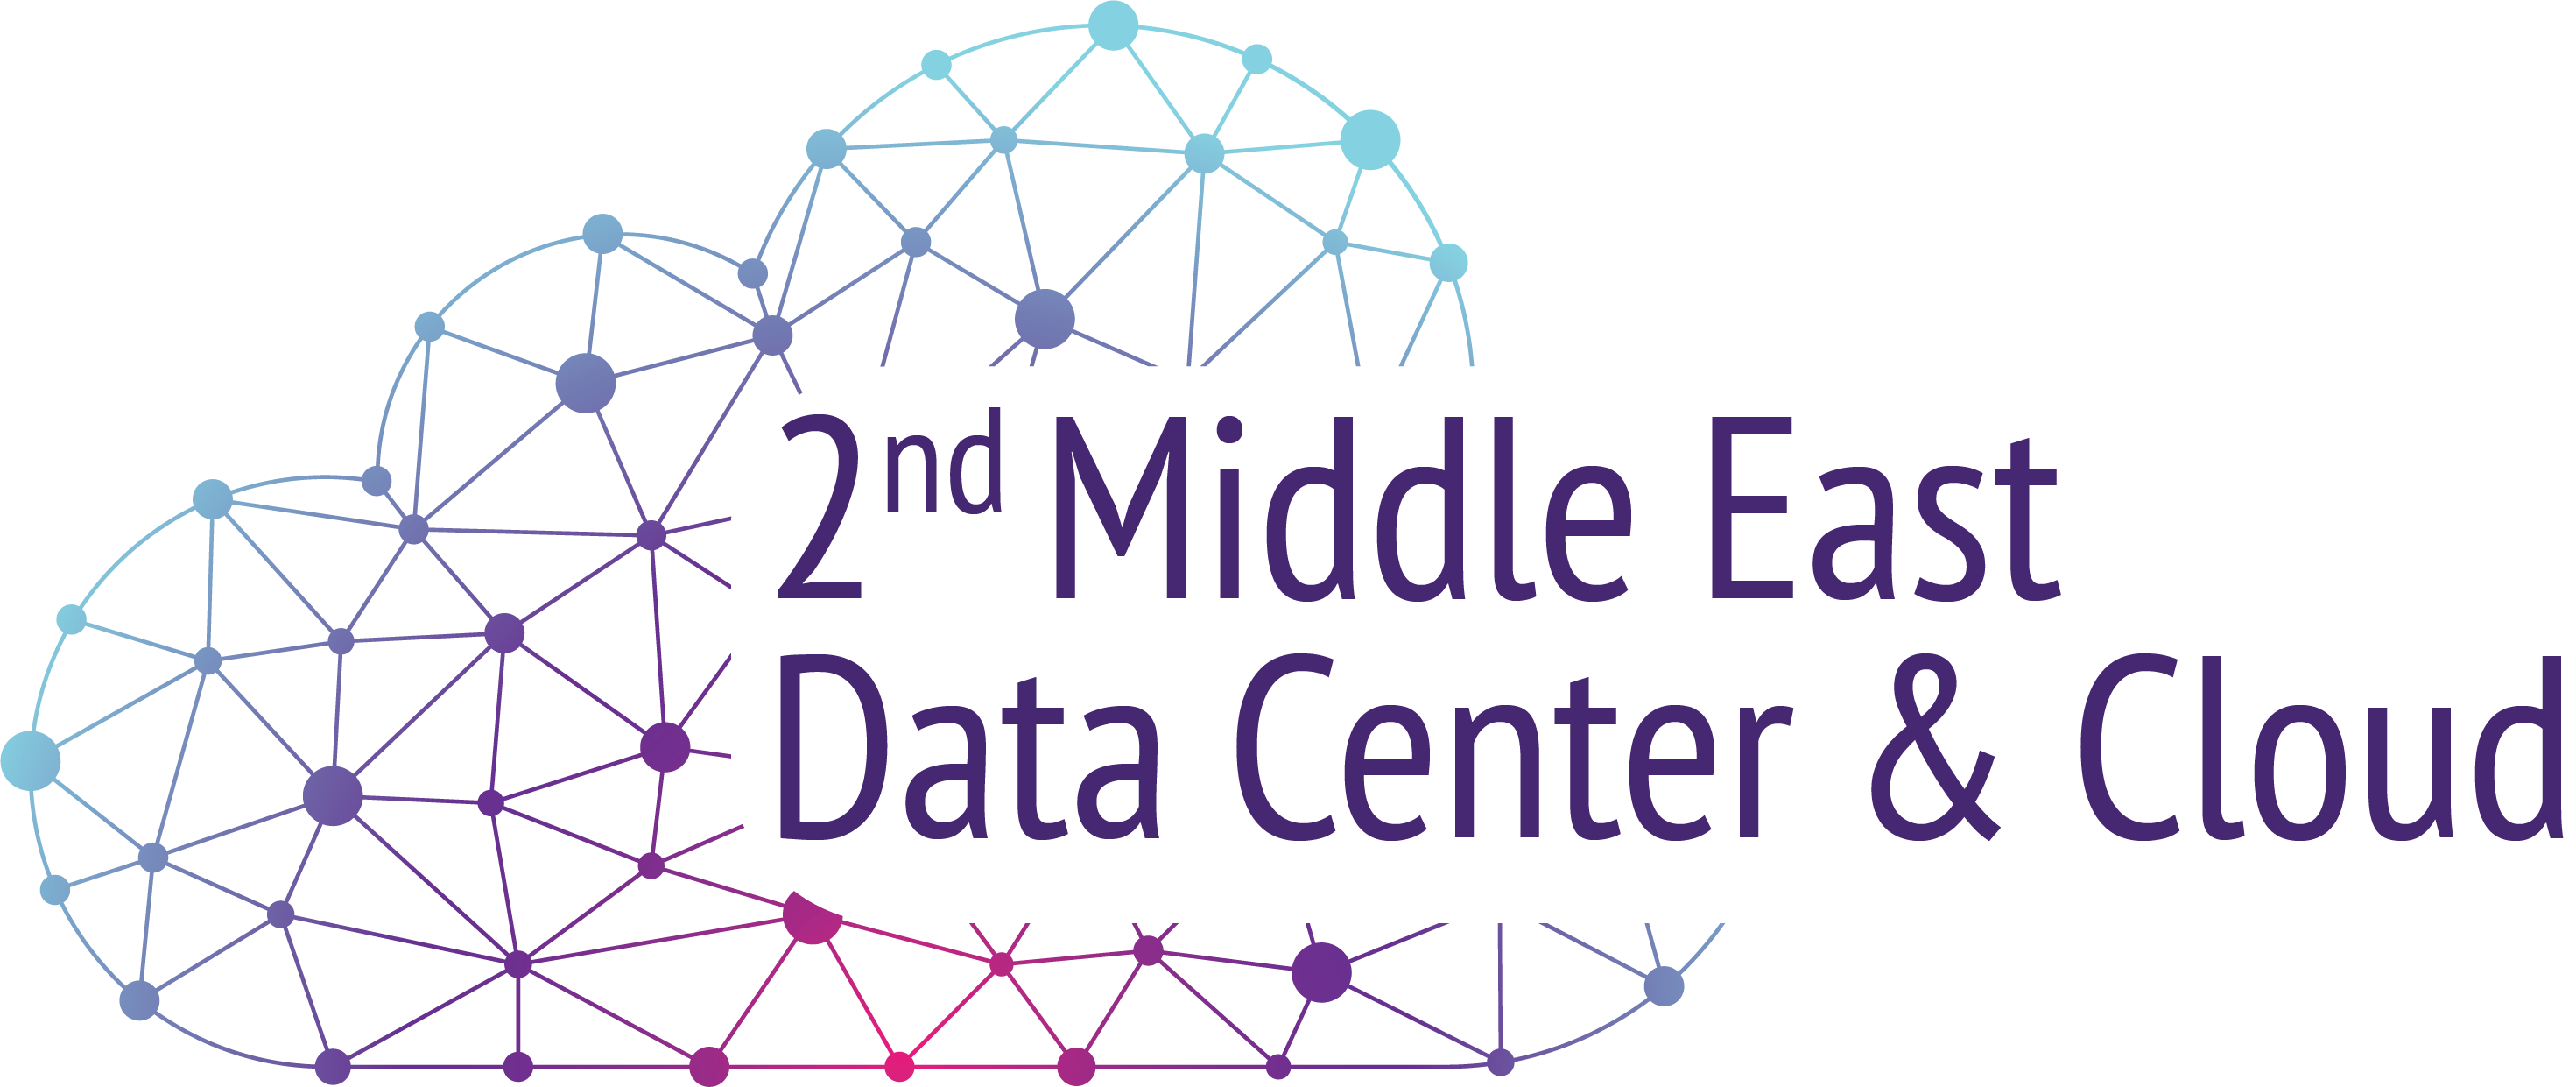 4th Middle East Datacenter & Cloud Virtual Event Boardroom